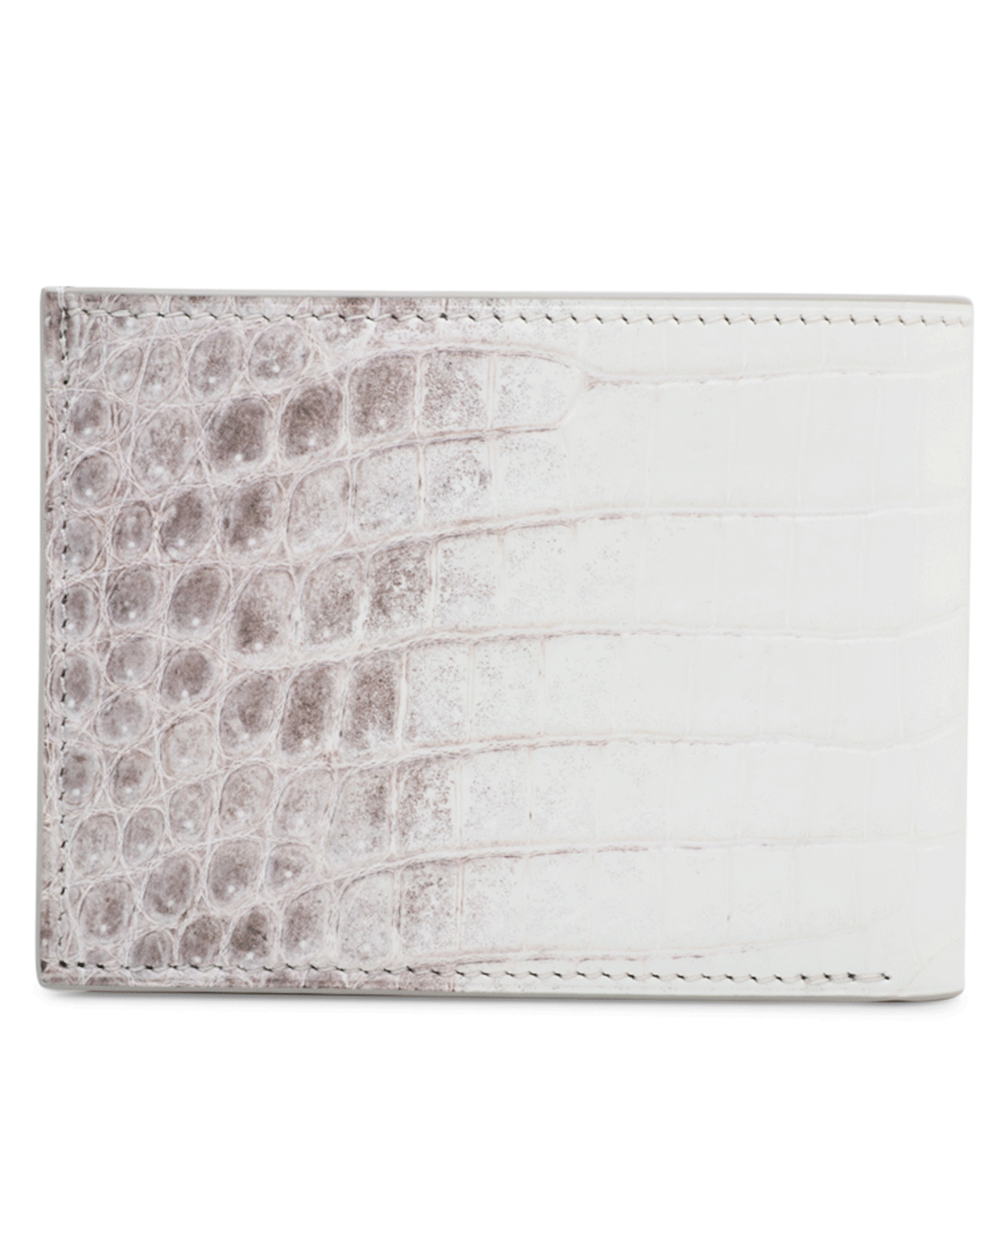 Deluxe Himalayan Bifold Wallet in White Snow Cap